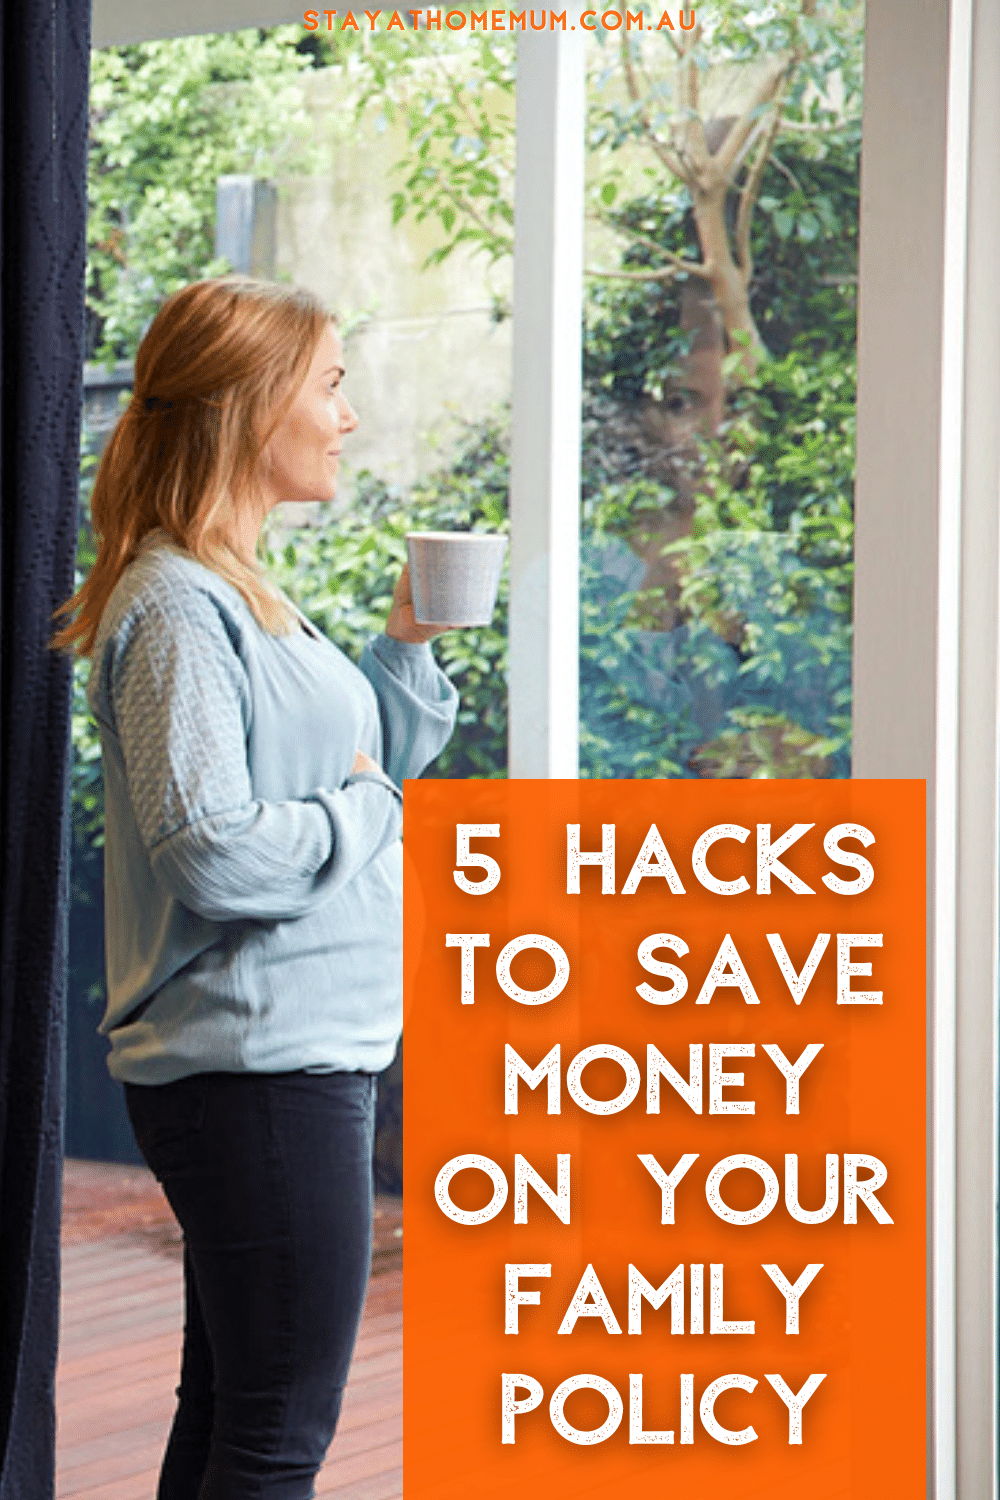 5 Hacks to Save Money on Your Family Policy | Stay At Home Mum